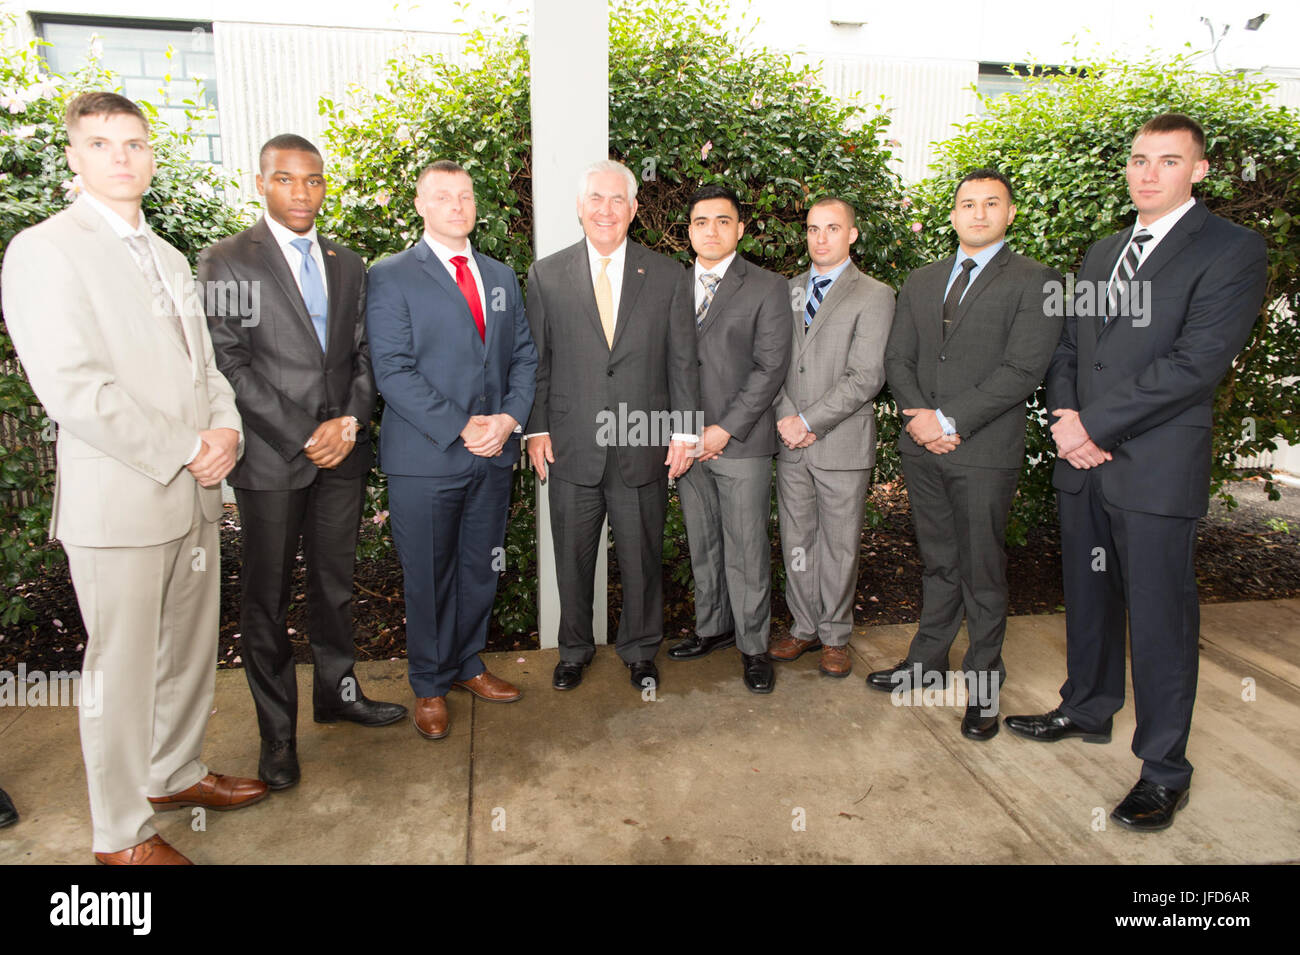 U.S. Secretary of State Rex Tillerson takes a photo with the Marine Security Guard Detachment at the U.S. Embassy in Wellington, New Zealand, on June 6, 2017. Stock Photo